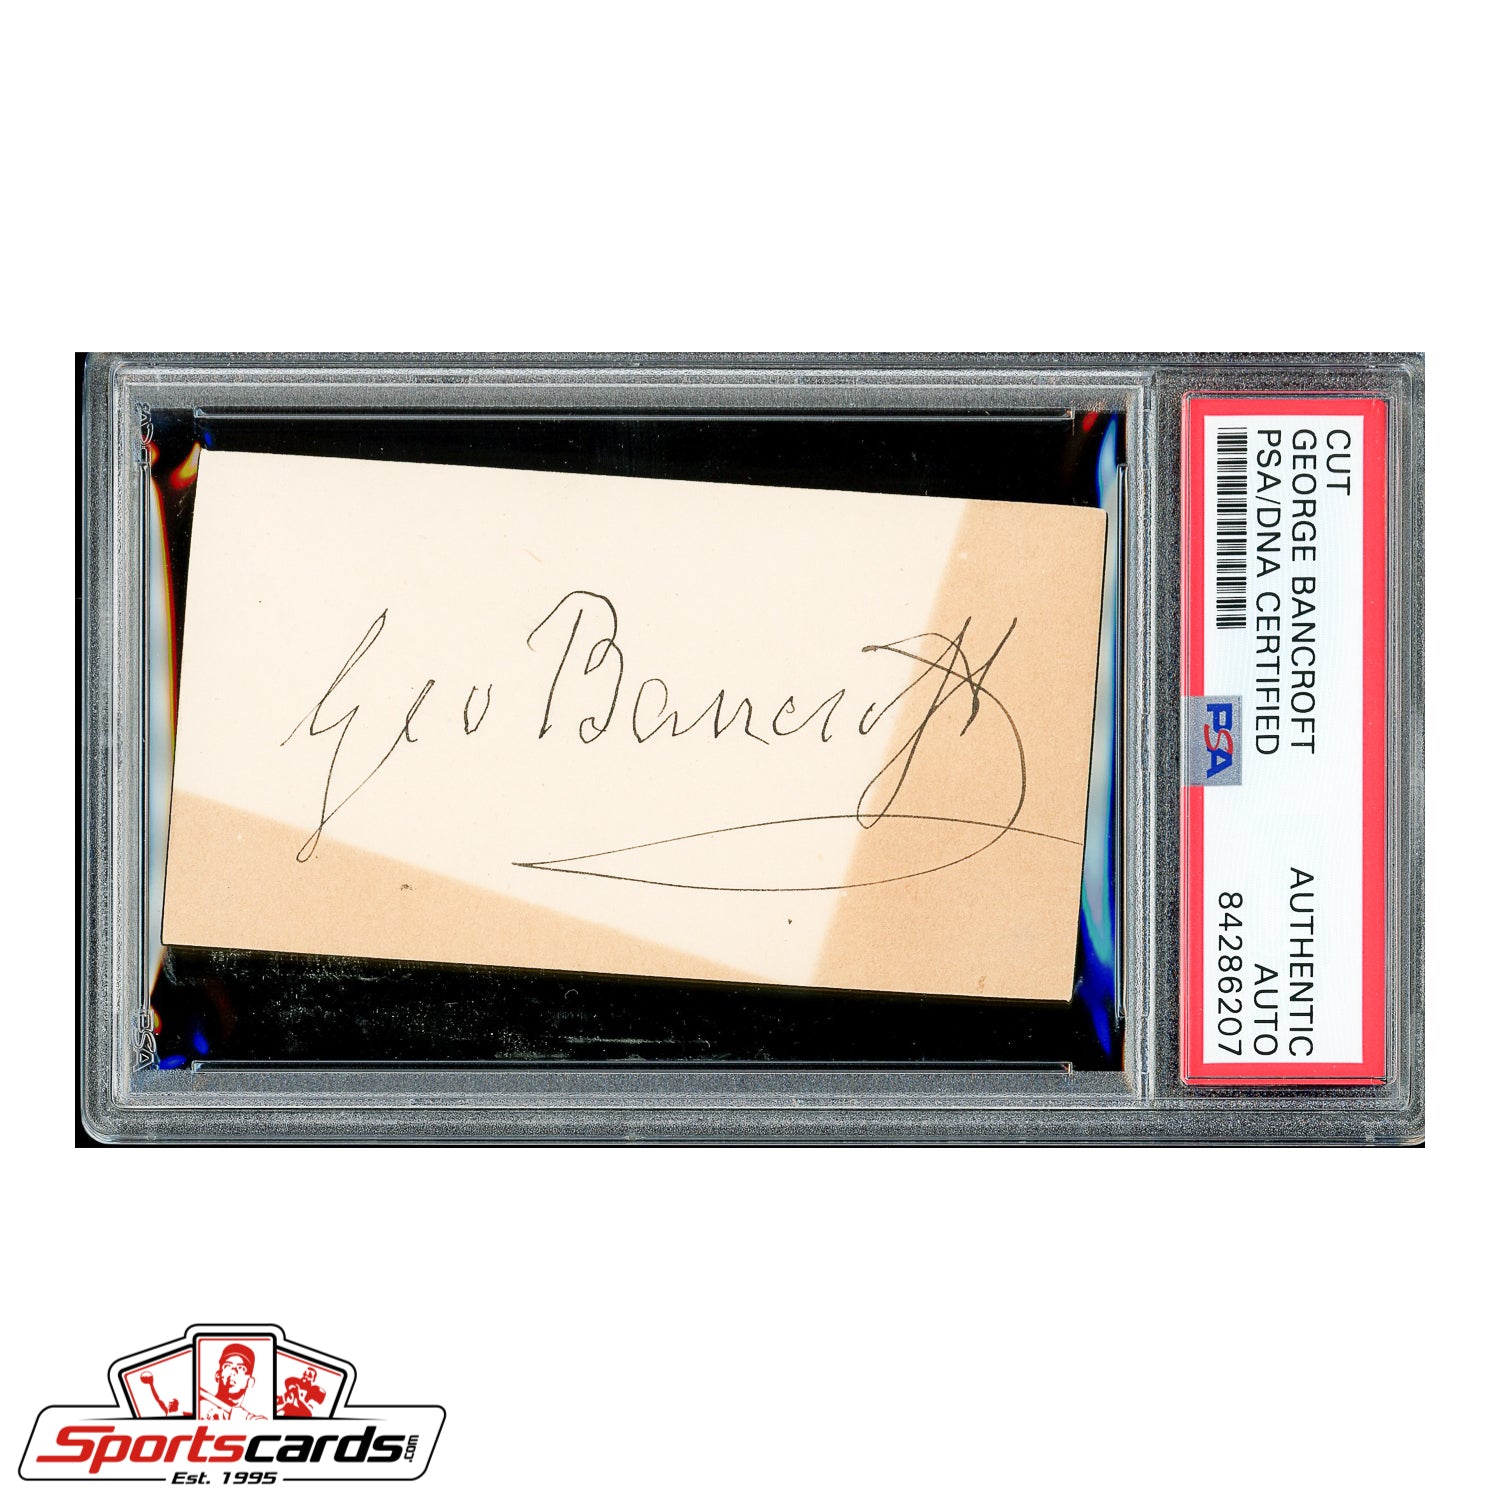 American Statesman George Bancroft Signed Autographed Card - PSA/DNA